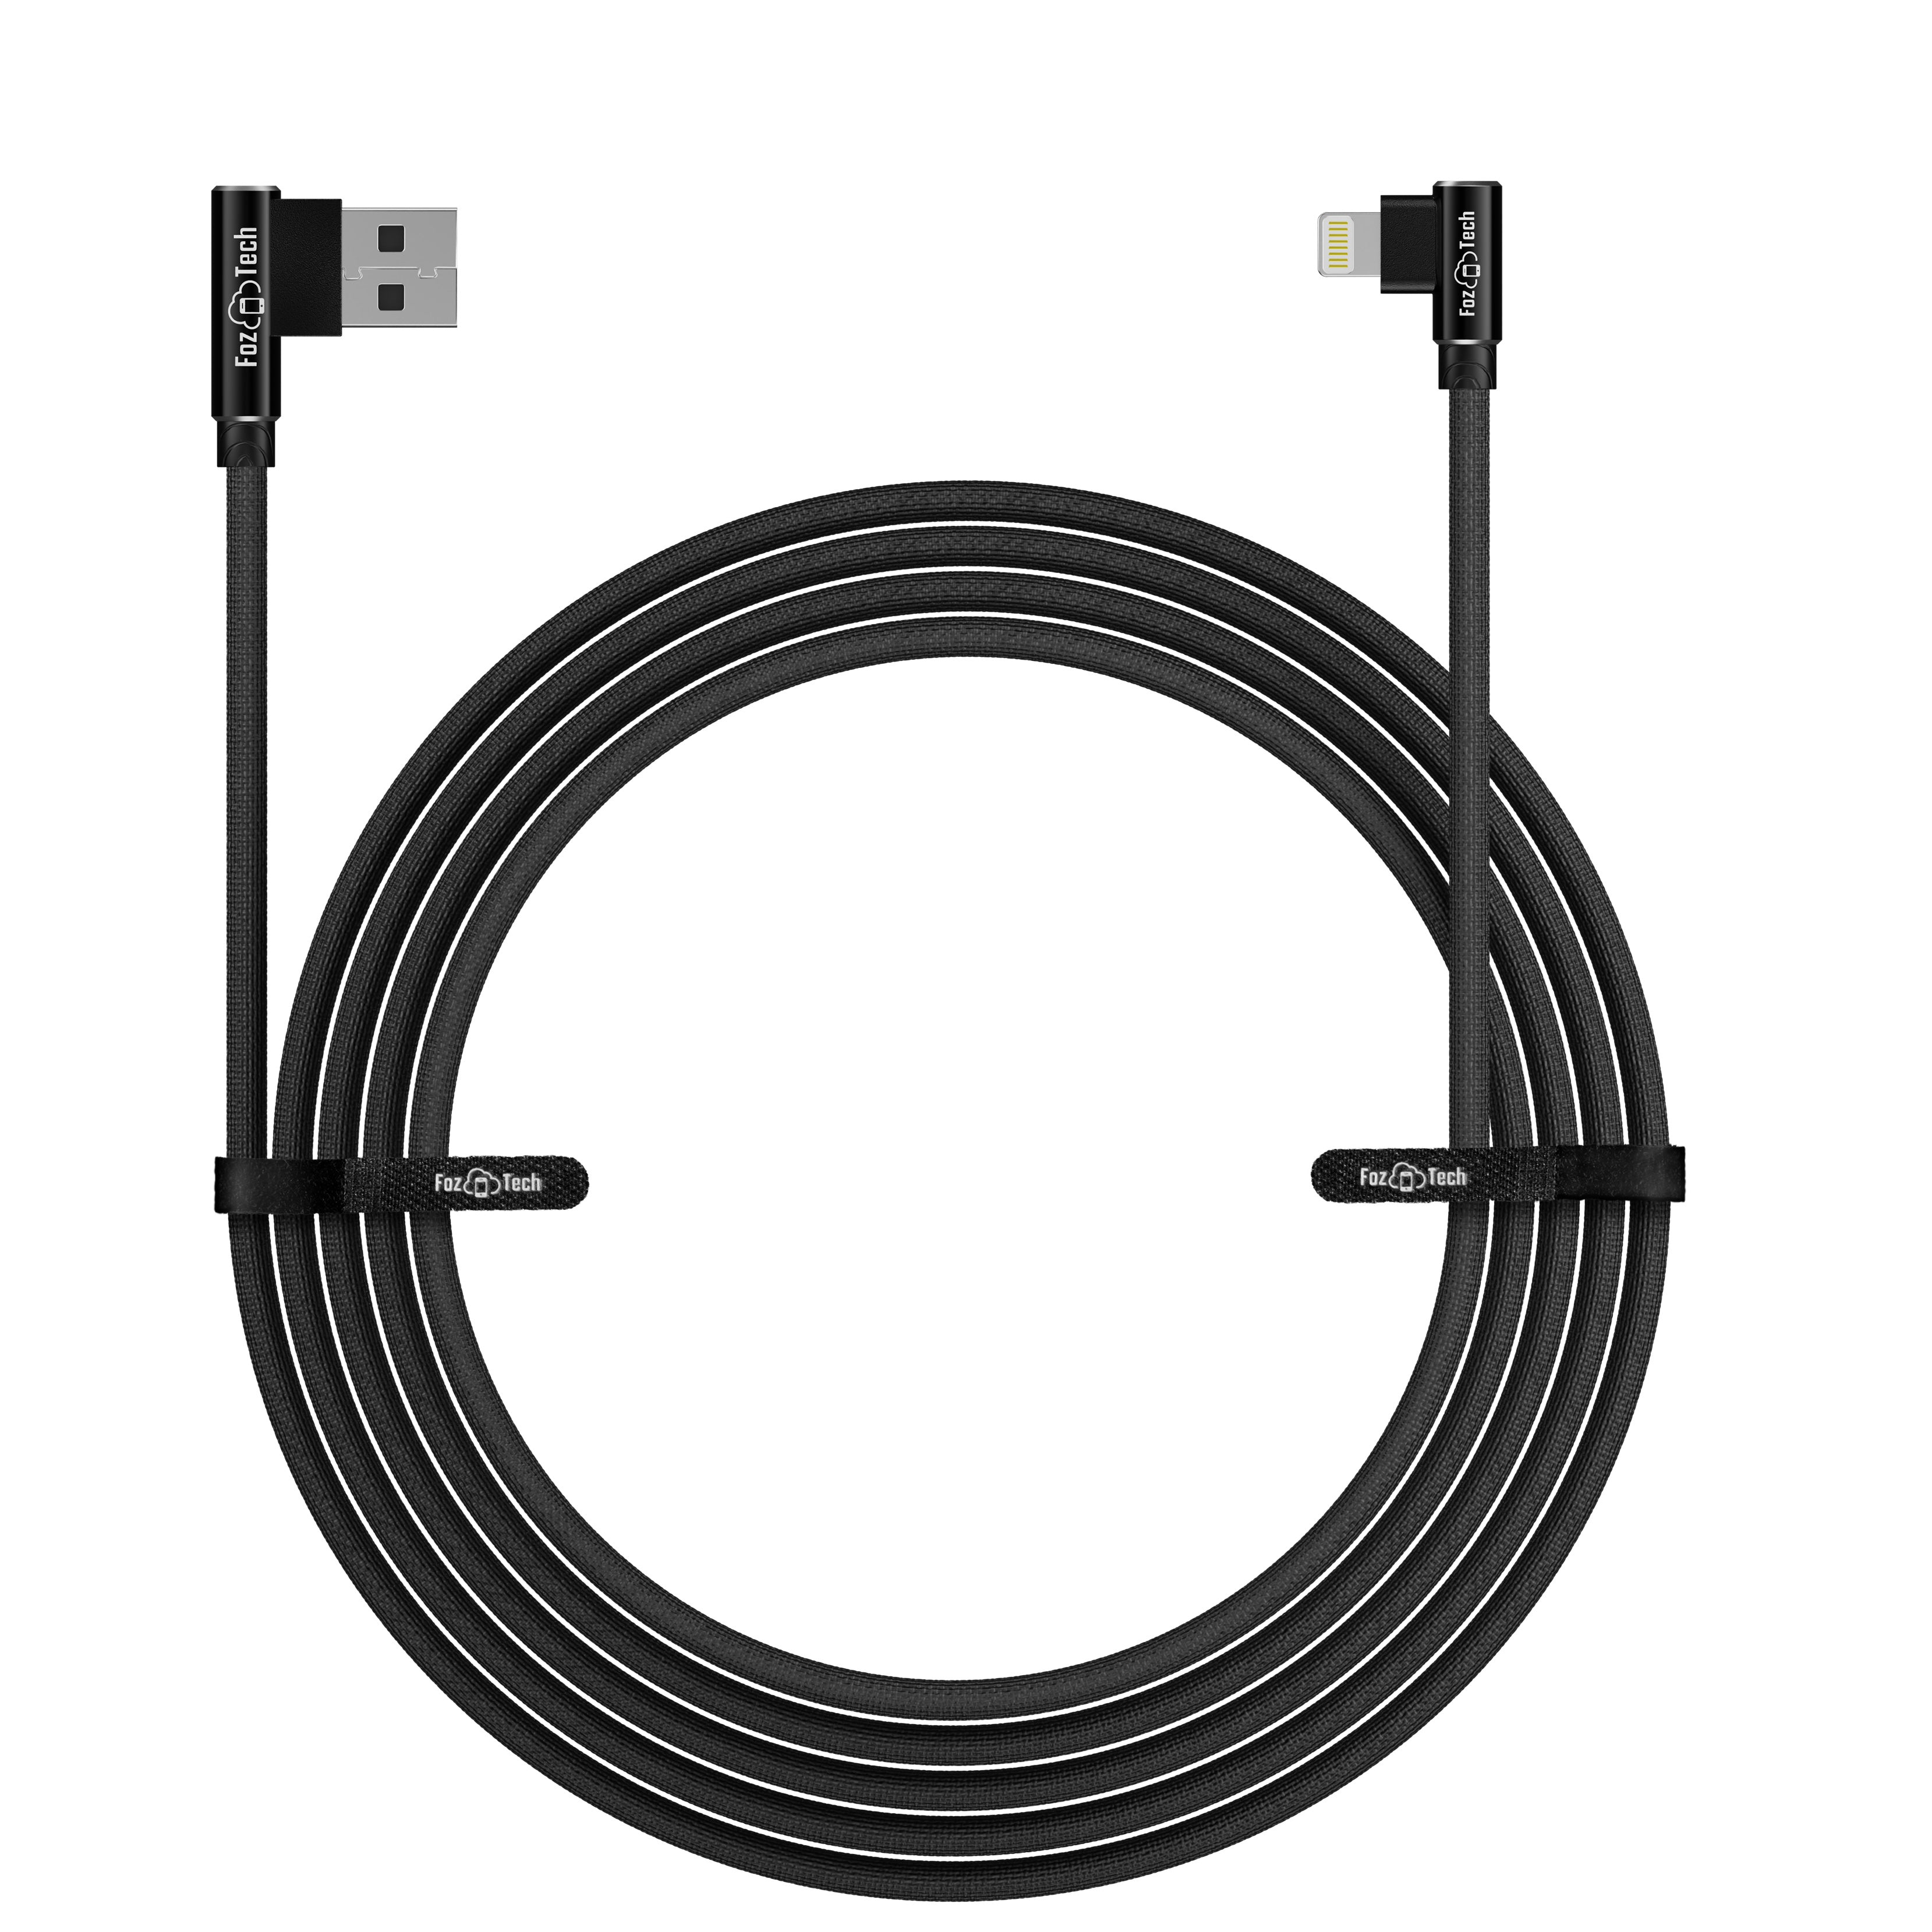 FozTech - Angled Series - Angled USB Charger Cable Data Sync Lead for iPhone, iPad, iPod - Black - USB Cable - FozTech